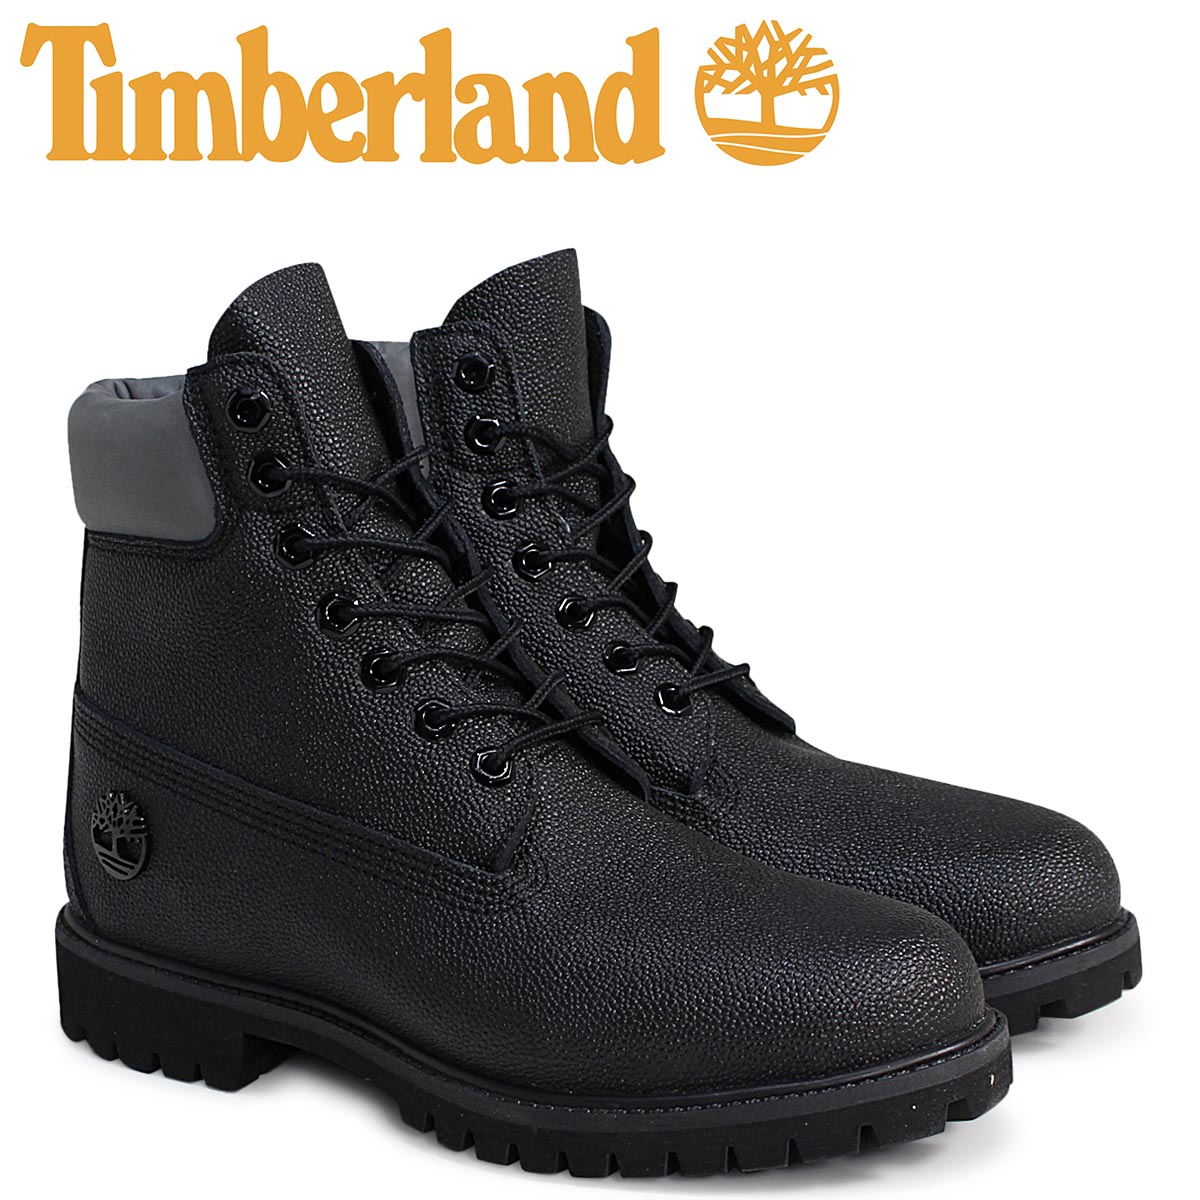 difference between premium and basic timberland boots